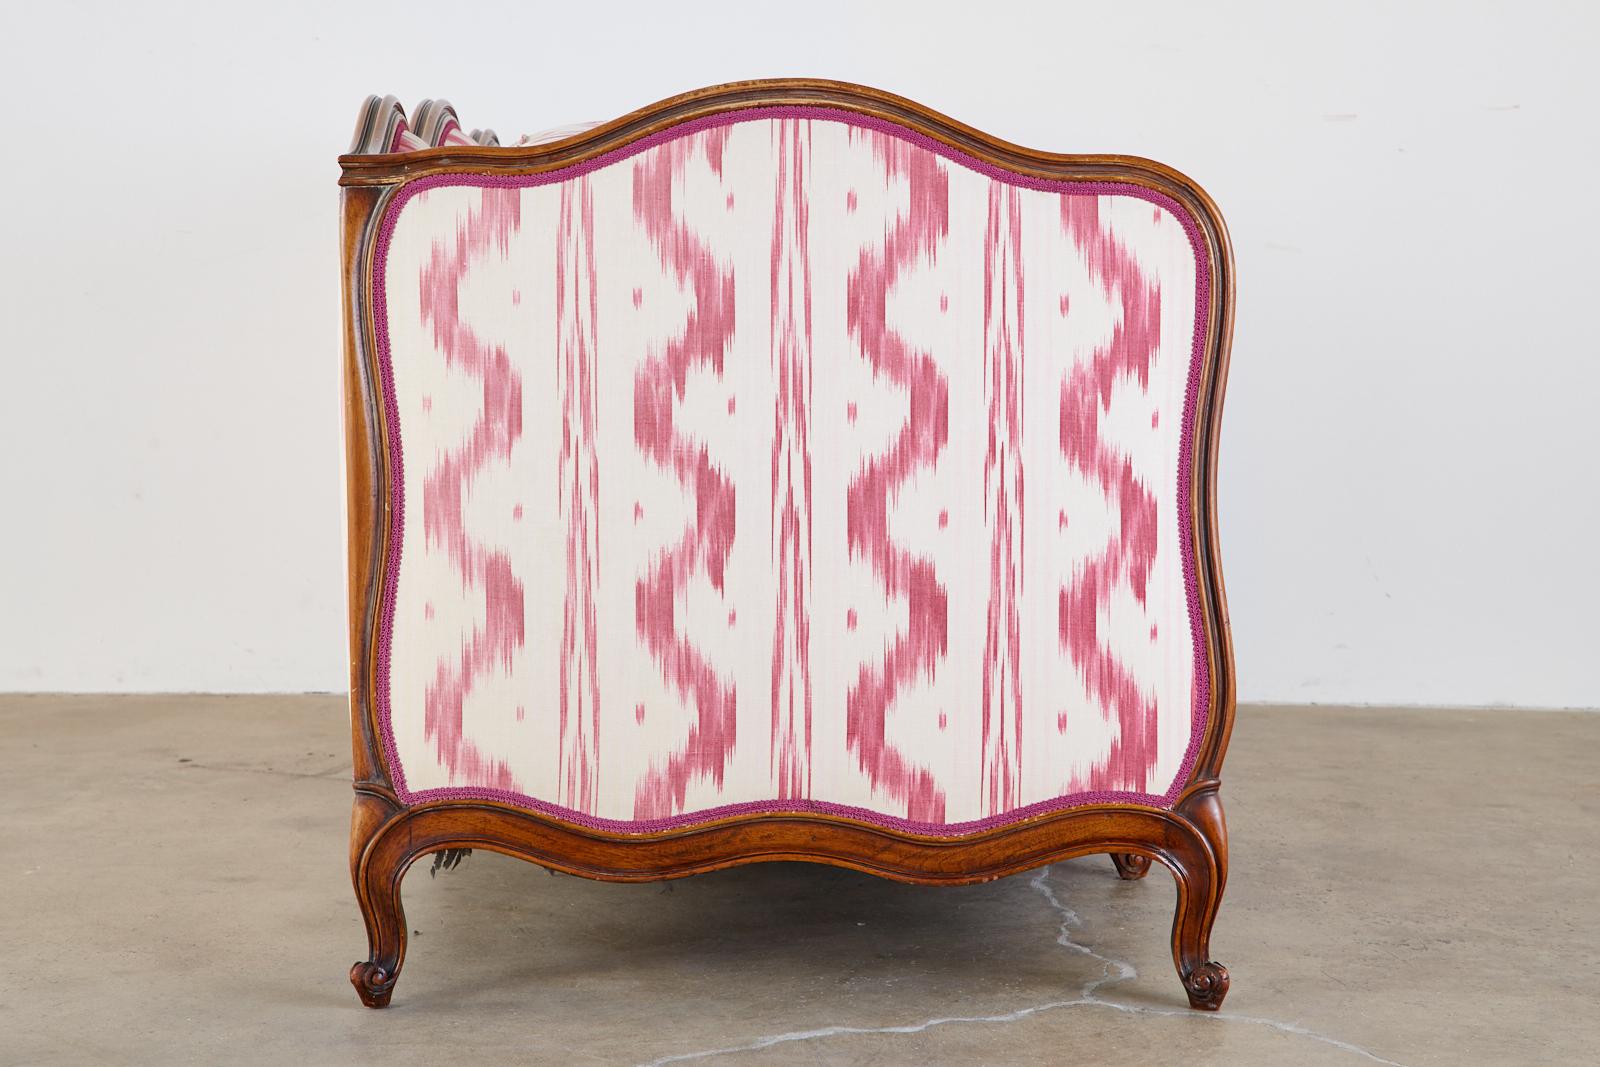 French Provincial Serpentine Canape Settee Pierre Frey Toile Ikat 1